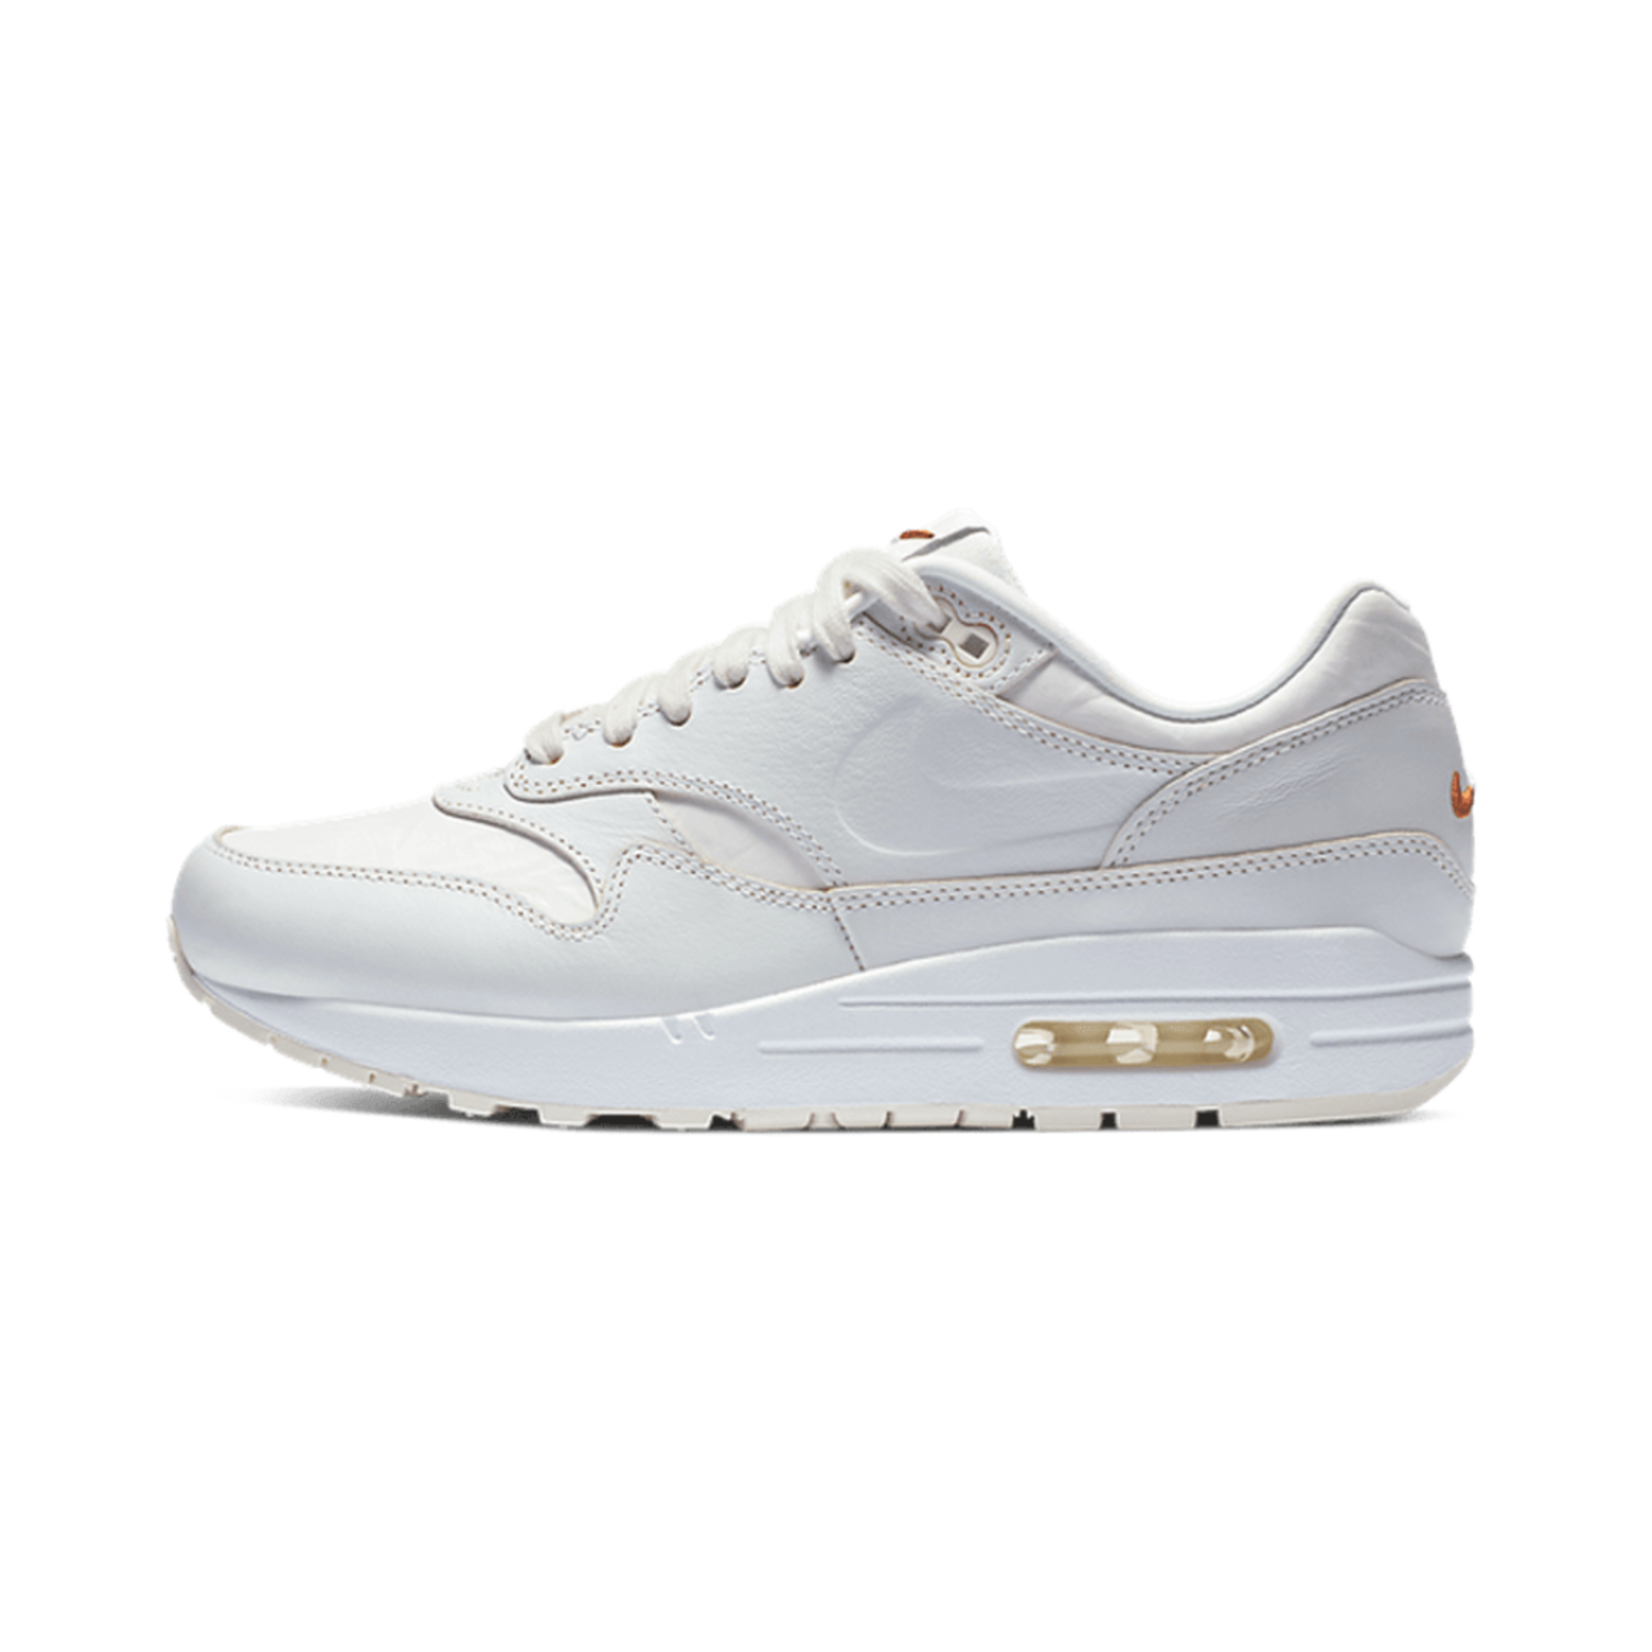 Nike Nike Air Max 1 Yours